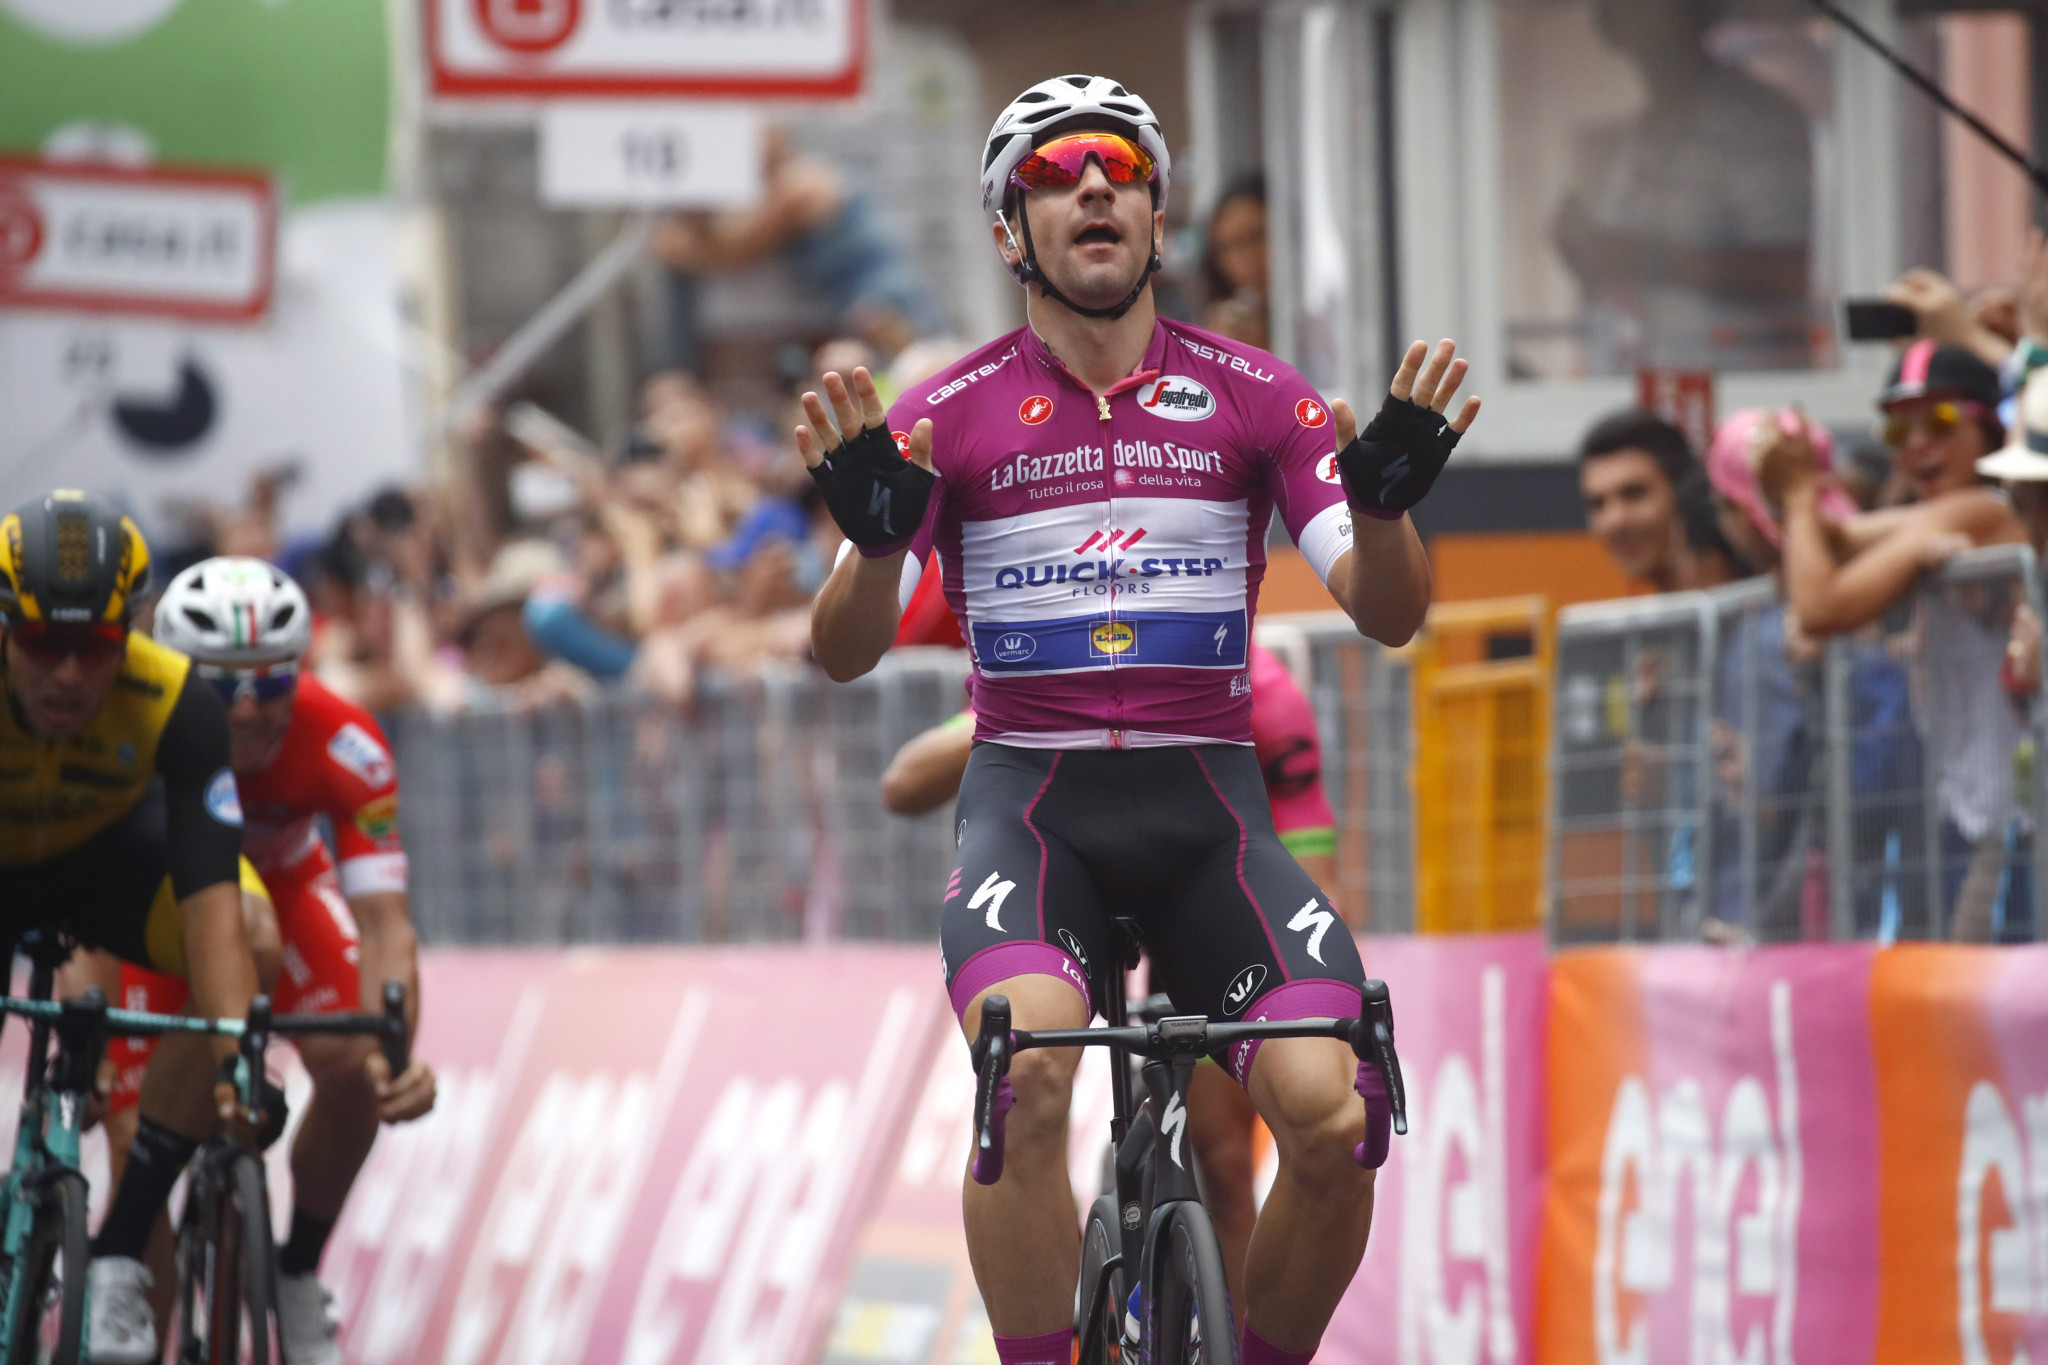 Elia Viviani secured his third stage win of the Giro d'Italia ©Getty Images